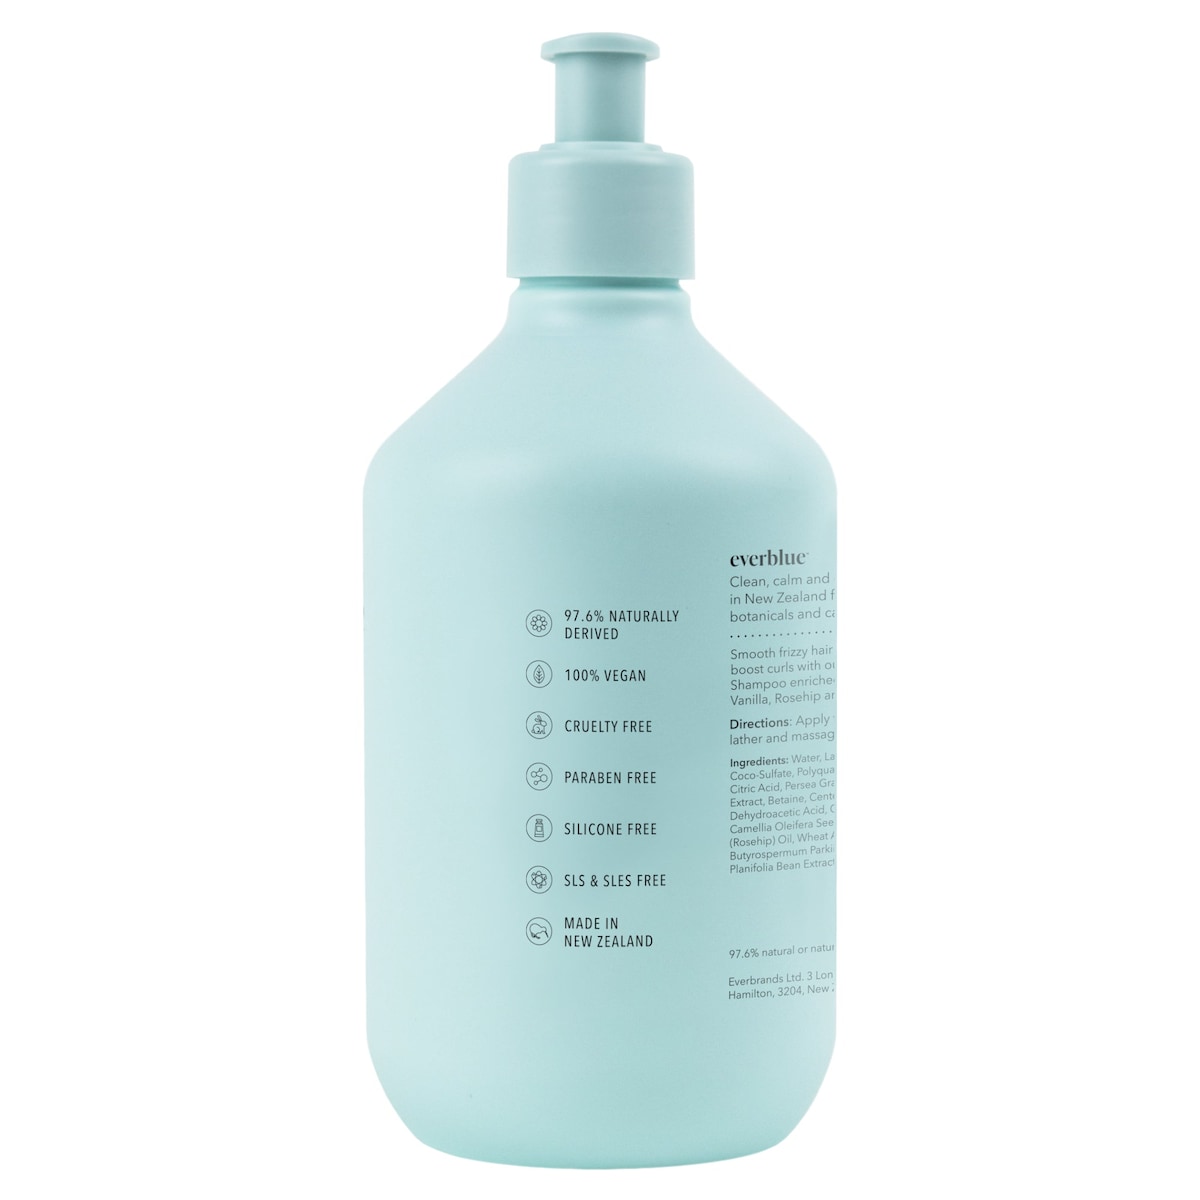 Everblue Shampoo Fearless Smooth and Nourish 400ml